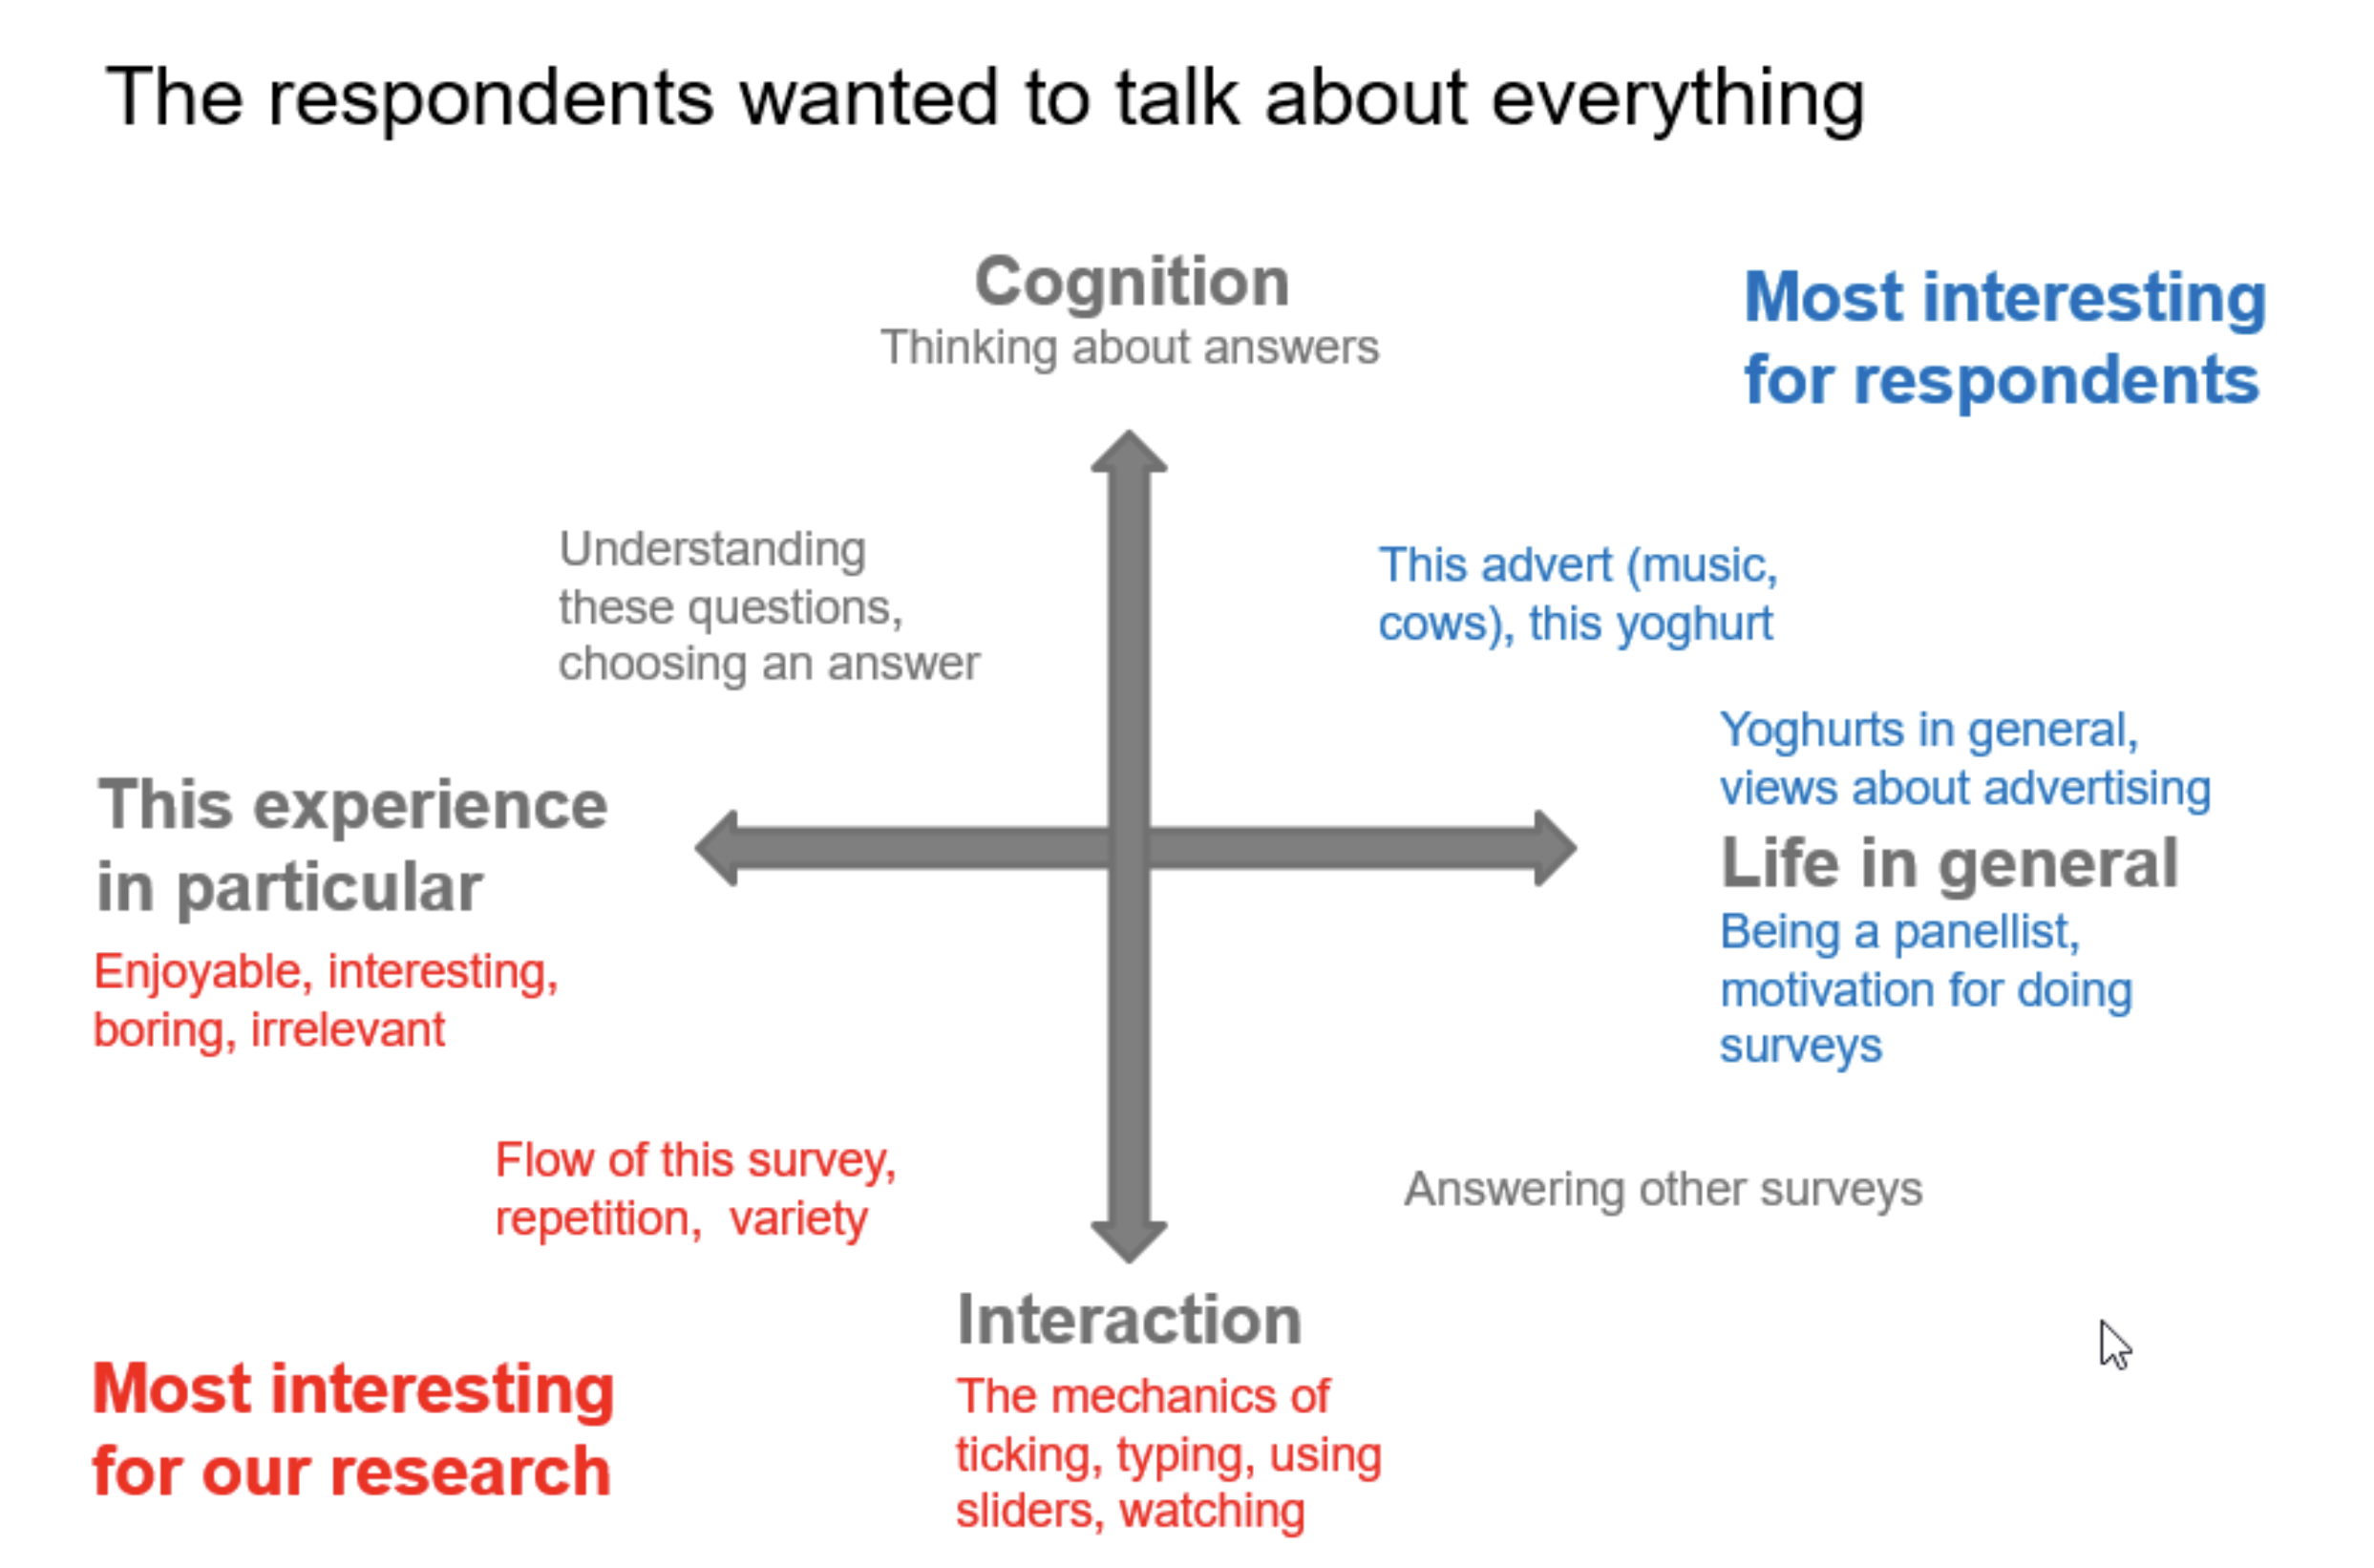 Four way diagram that contrasts Cognition (thinking about answers) with Interaction (the mechanics of ticking, typing, using sliders, watching), and 'This experience in particular' (enjoyable, interesting, boring,, irrelevant) with 'Life in general'. The items highlighted as 'Most interesting for respondents are in the 'Cognition/life in general' area and include: This advert (music, cows, this yoghurt), and nearer to 'Life in general' topics such as Yoghurts in general, views about advertising, being a panellist, motivation for doing surveys. The items highlighted as 'Most interesting for our research' are in the area of 'Interaction' and 'This experience in particular'